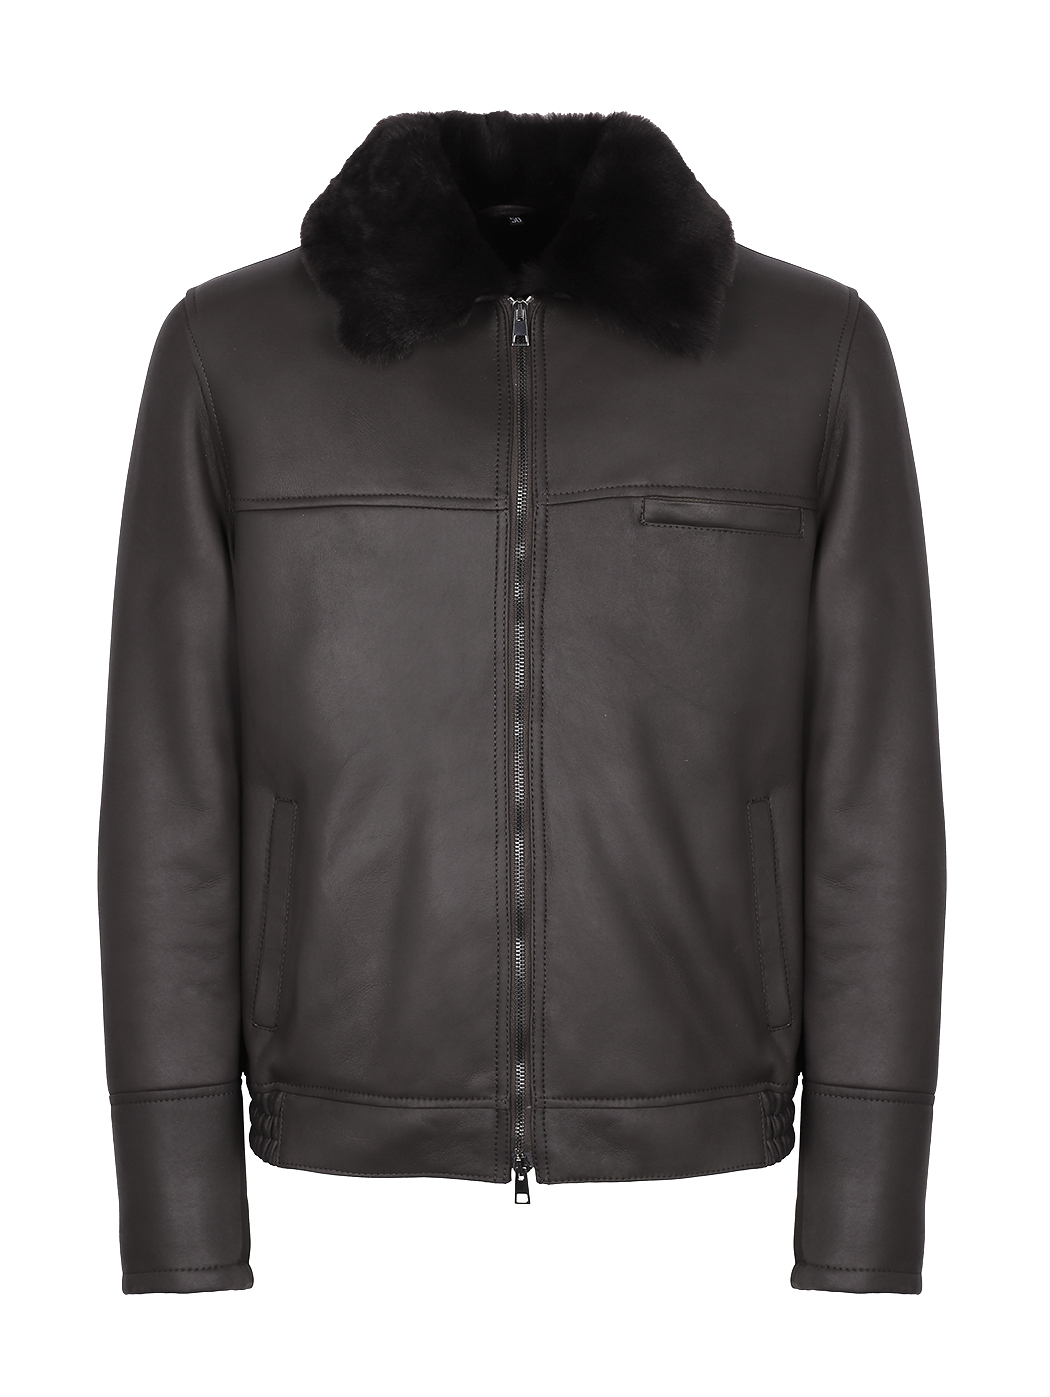 Shearling Double-faced Bomber Jacket Black